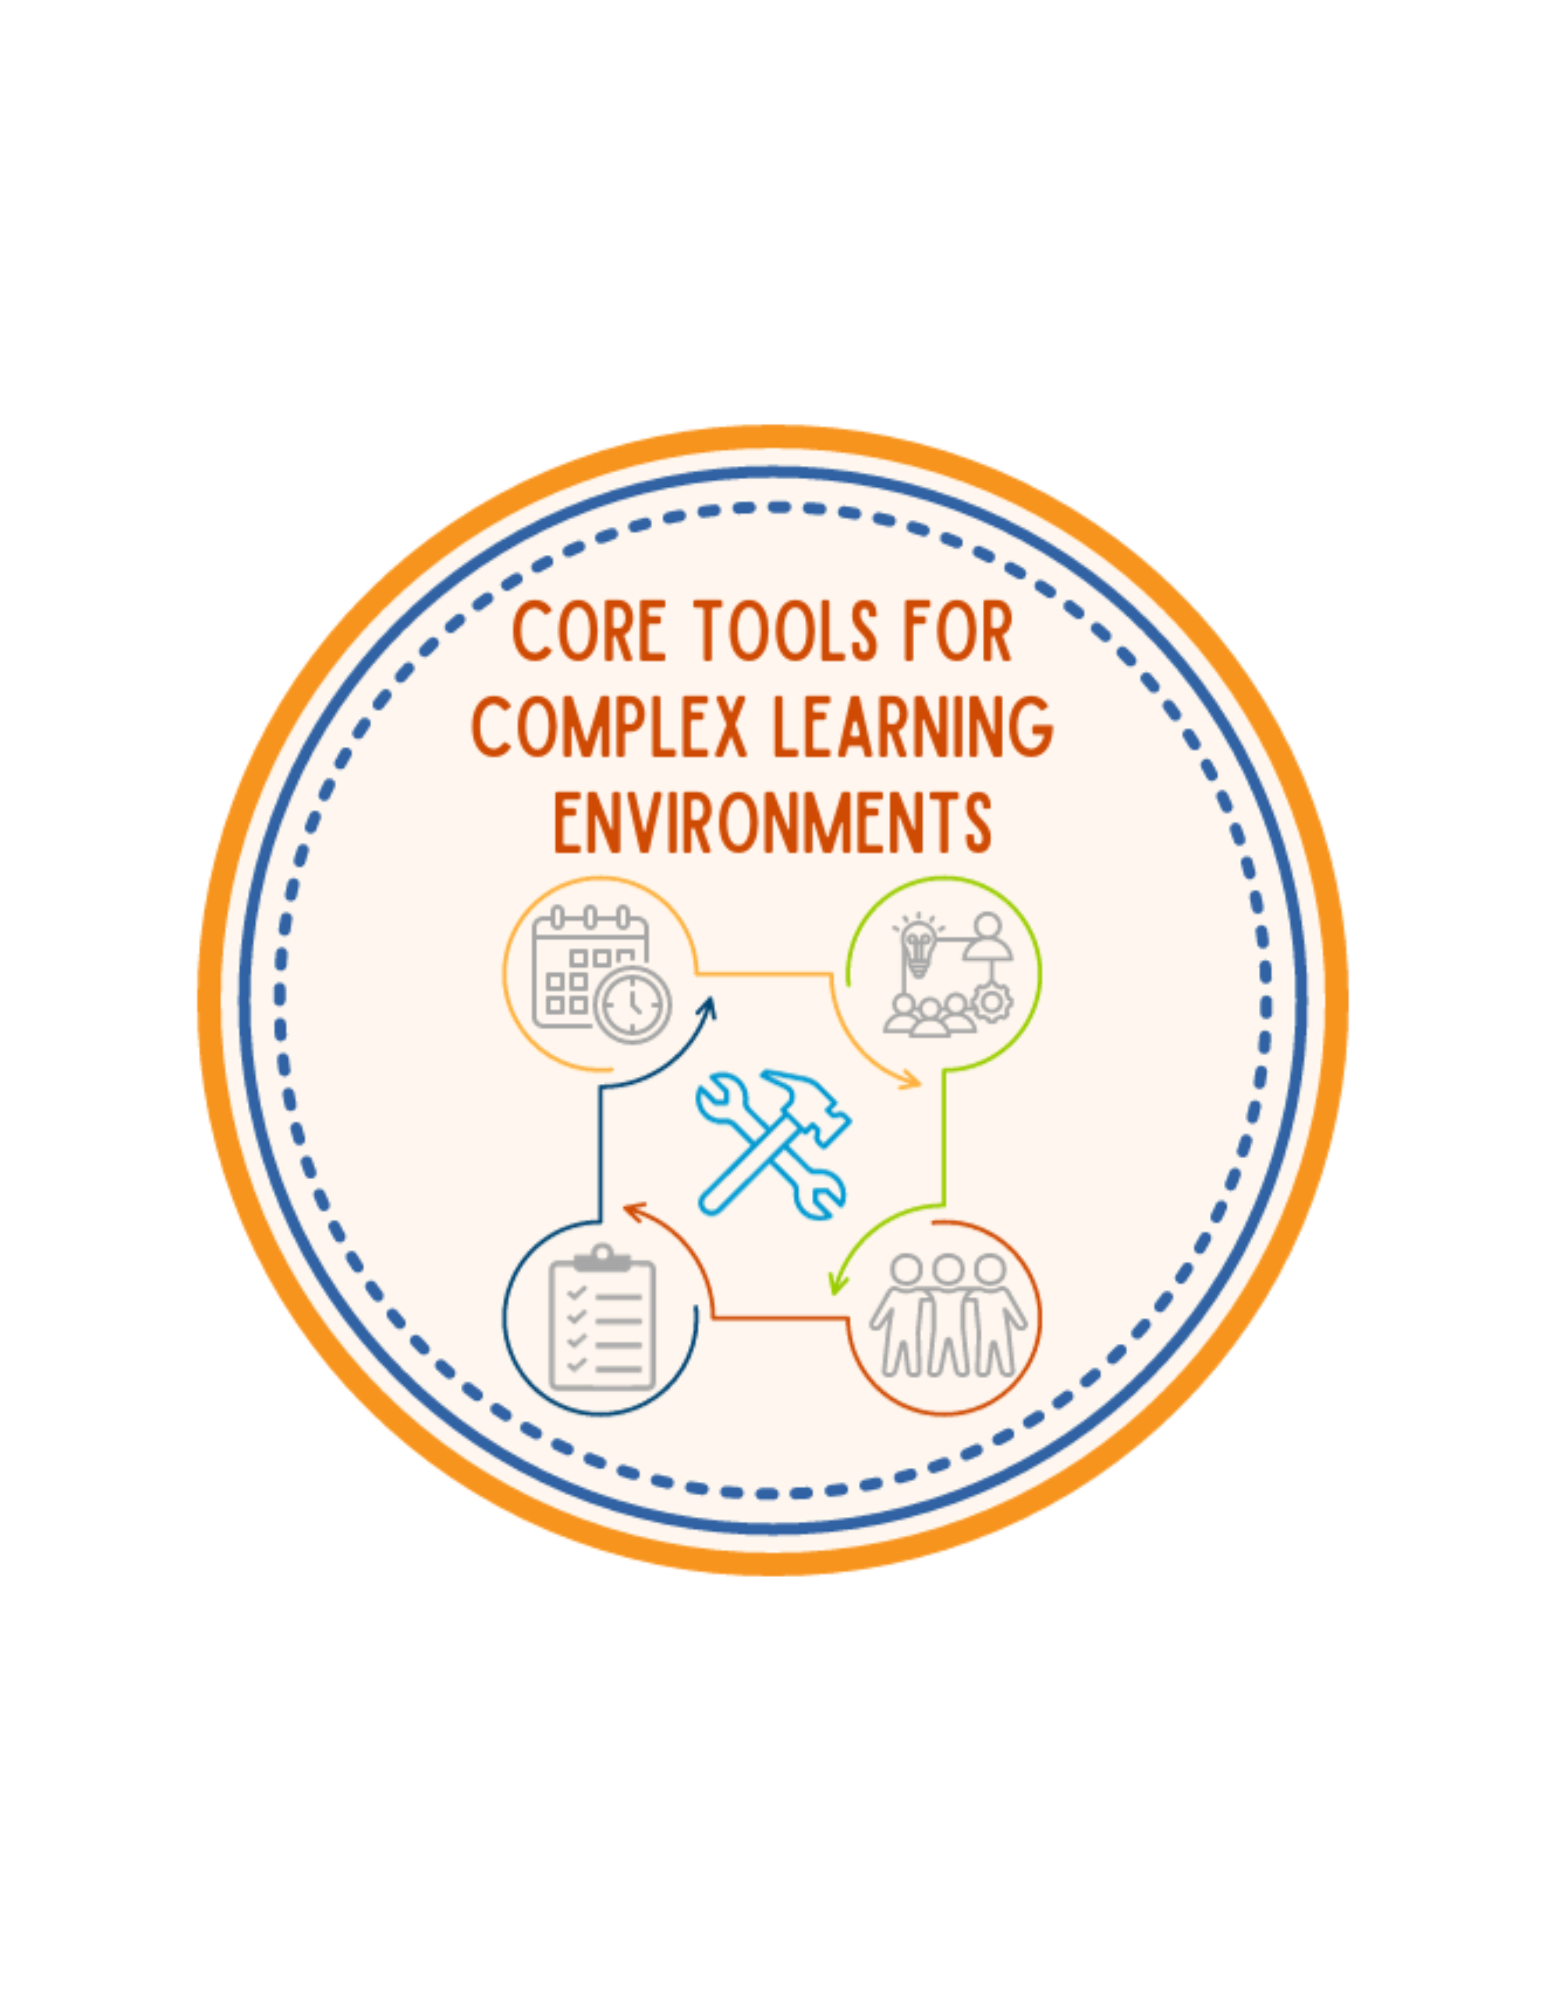 Core Tools for complex learning environments